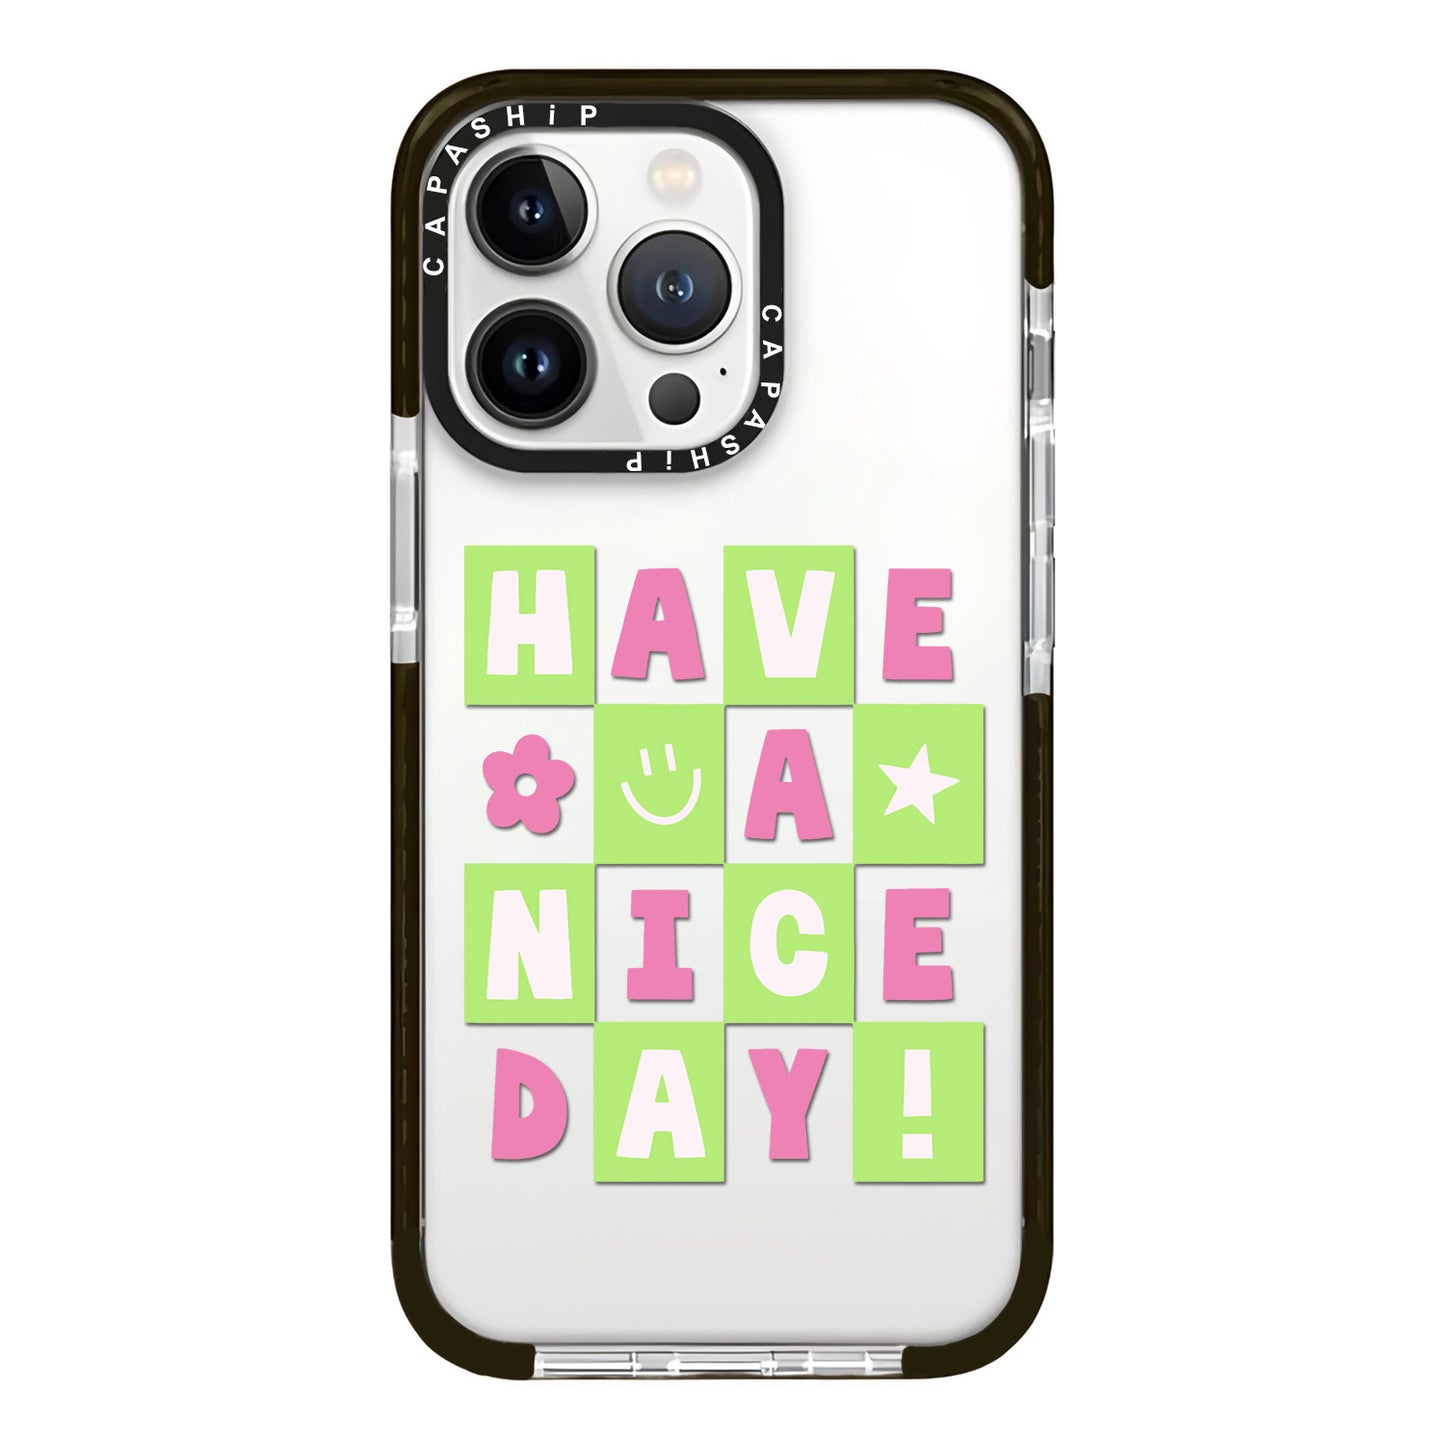 Have a nice day phone case for iPhone